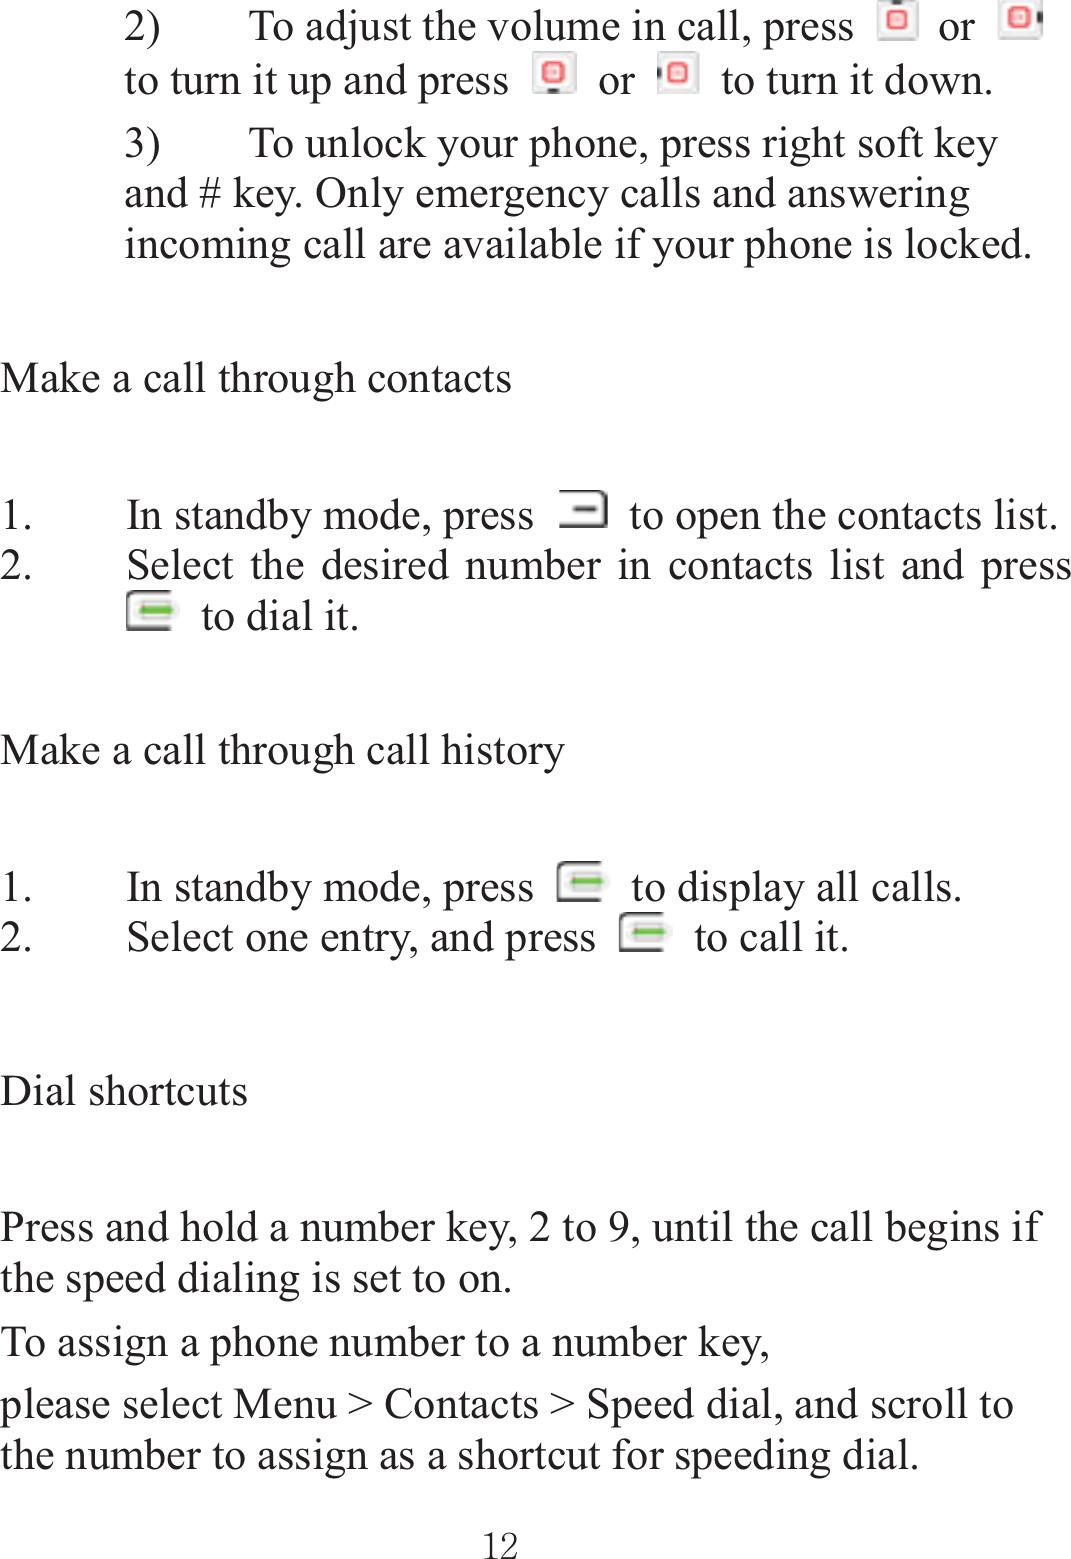 2) To adjust the volume in call, press   or to turn it up and press   or    to turn it down. 3) To unlock your phone, press right soft key and # key. Only emergency calls and answering incoming call are available if your phone is locked. Make a call through contacts 1. In standby mode, press    to open the contacts list. 2. Select the desired number in contacts list and press   to dial it. Make a call through call history 1. In standby mode, press    to display all calls. 2. Select one entry, and press    to call it. Dial shortcuts Press and hold a number key, 2 to 9, until the call begins if the speed dialing is set to on. To assign a phone number to a number key, please select Menu &gt; Contacts &gt; Speed dial, and scroll to the number to assign as a shortcut for speeding dial. ٻٻڌڍٻٻ